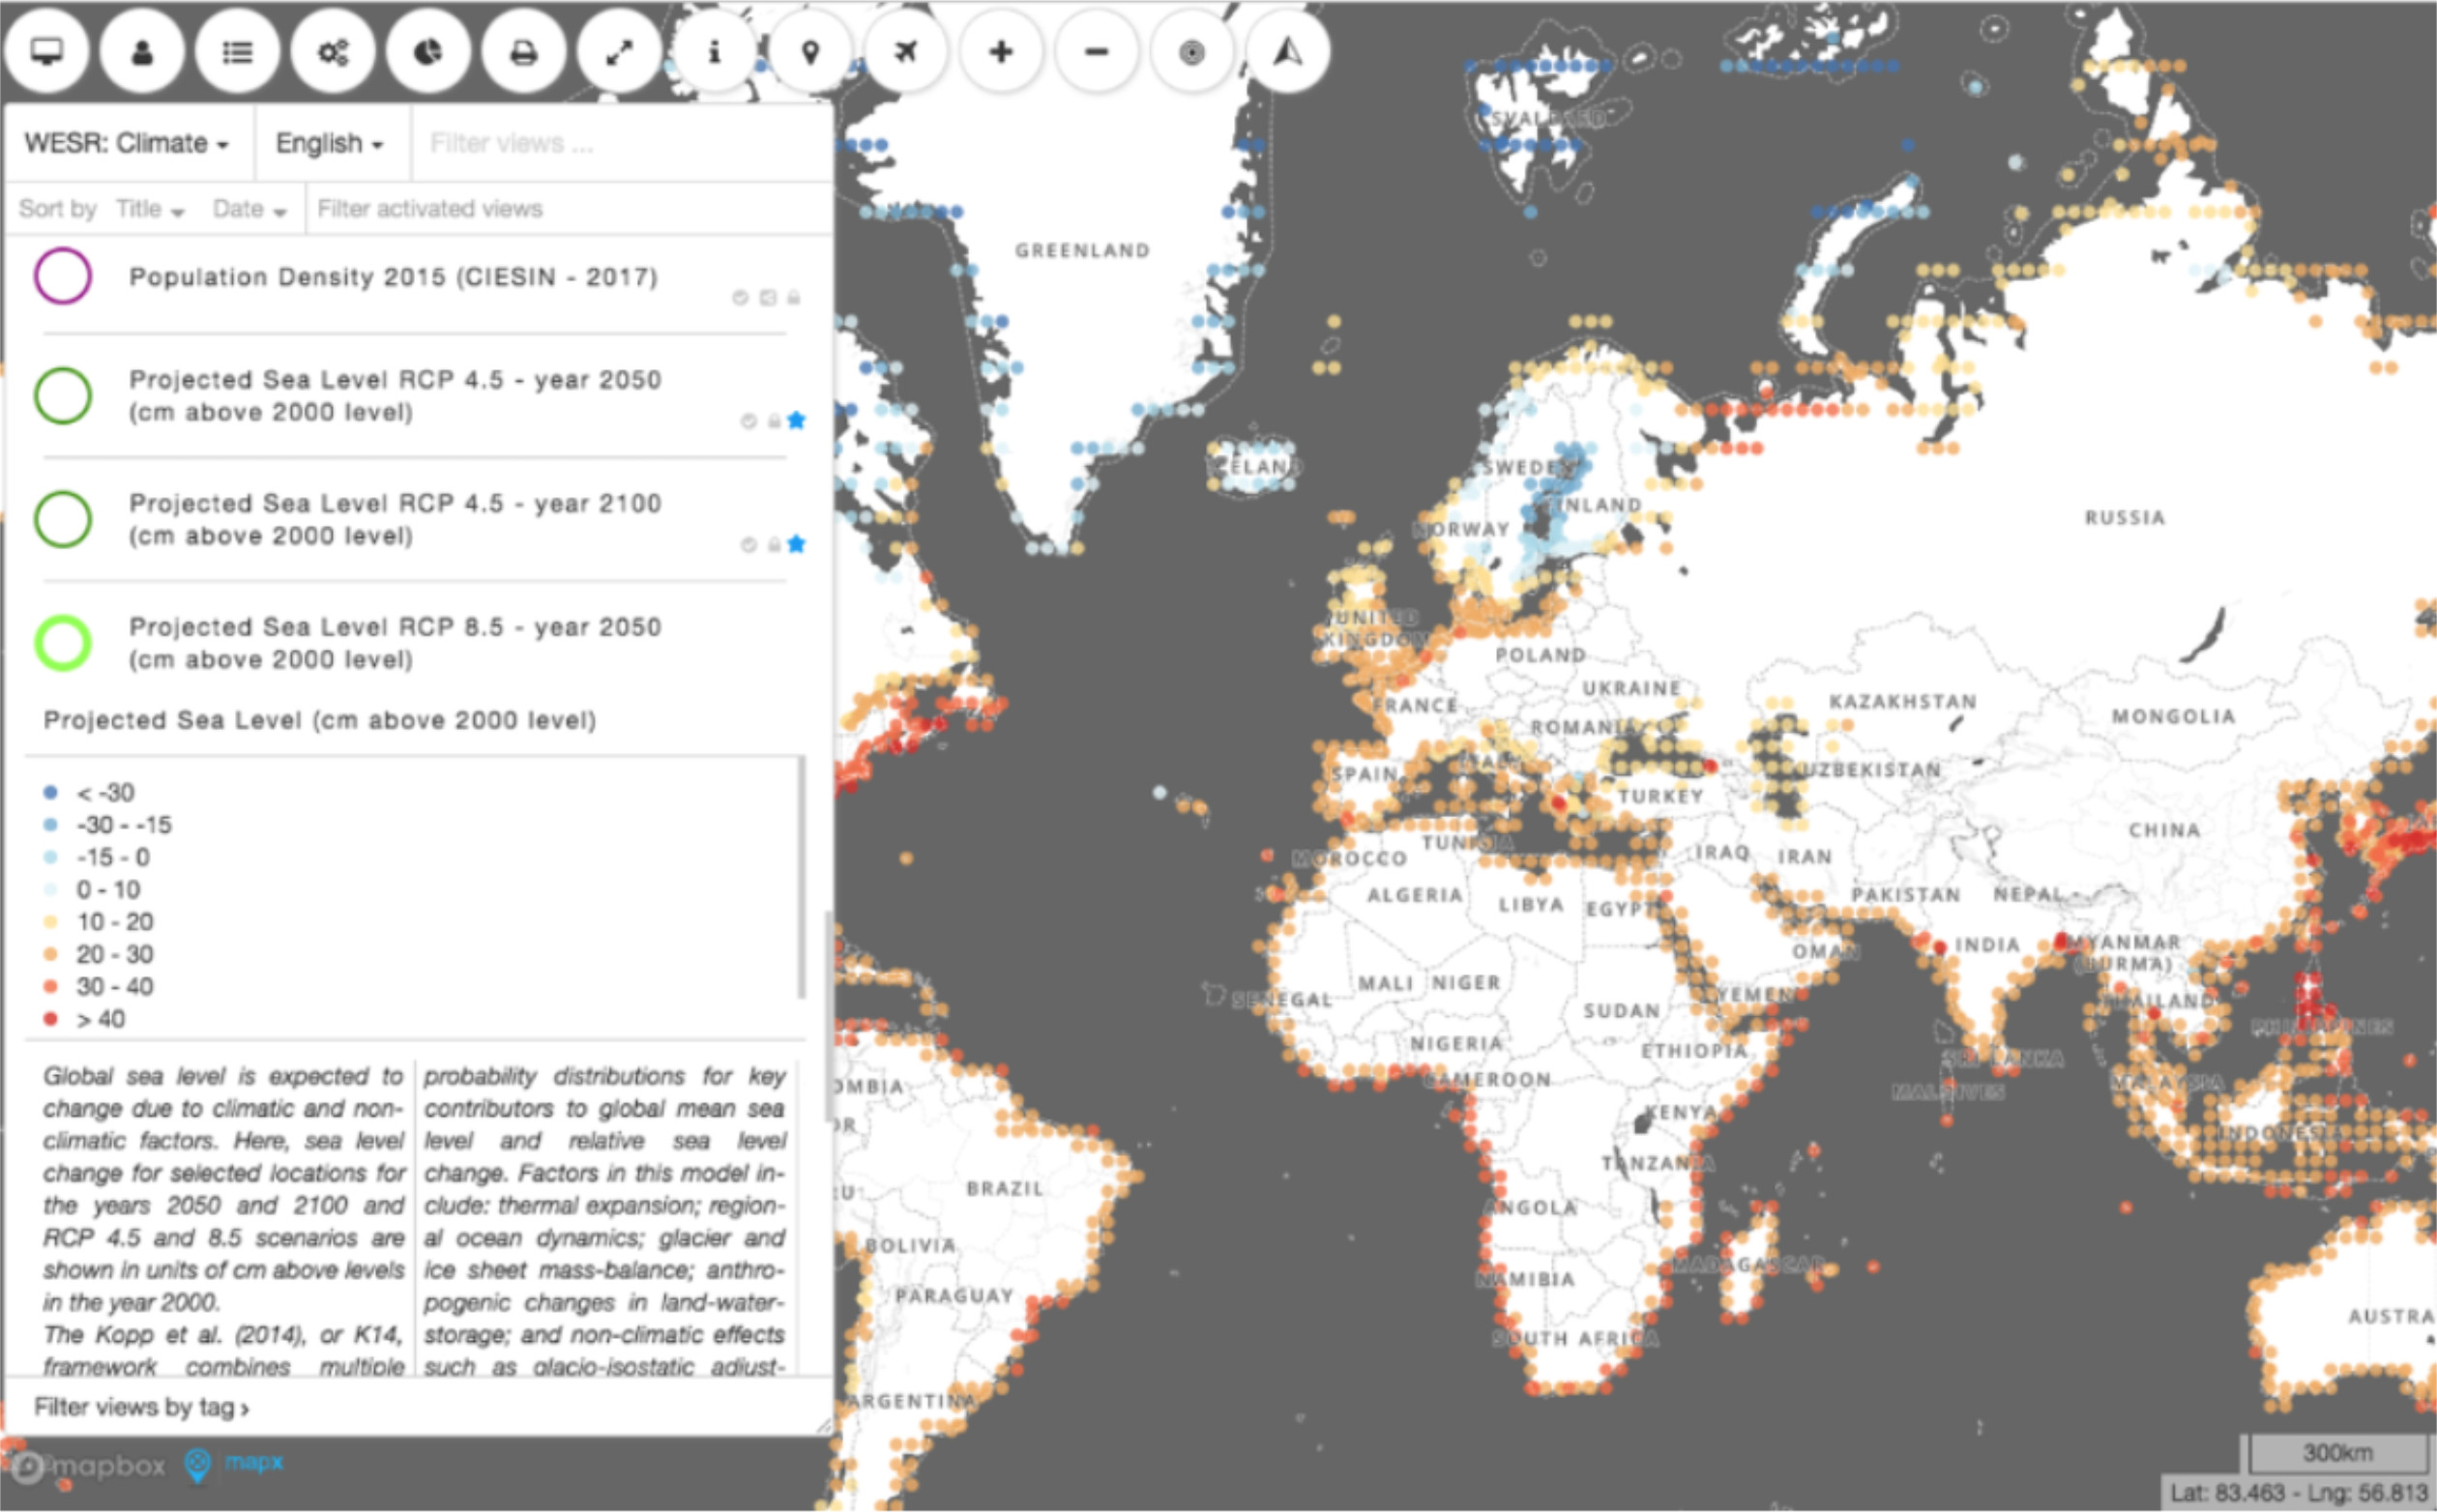 Example of climatic data published in the World Environment Situation Room through MapX, its geospatial component